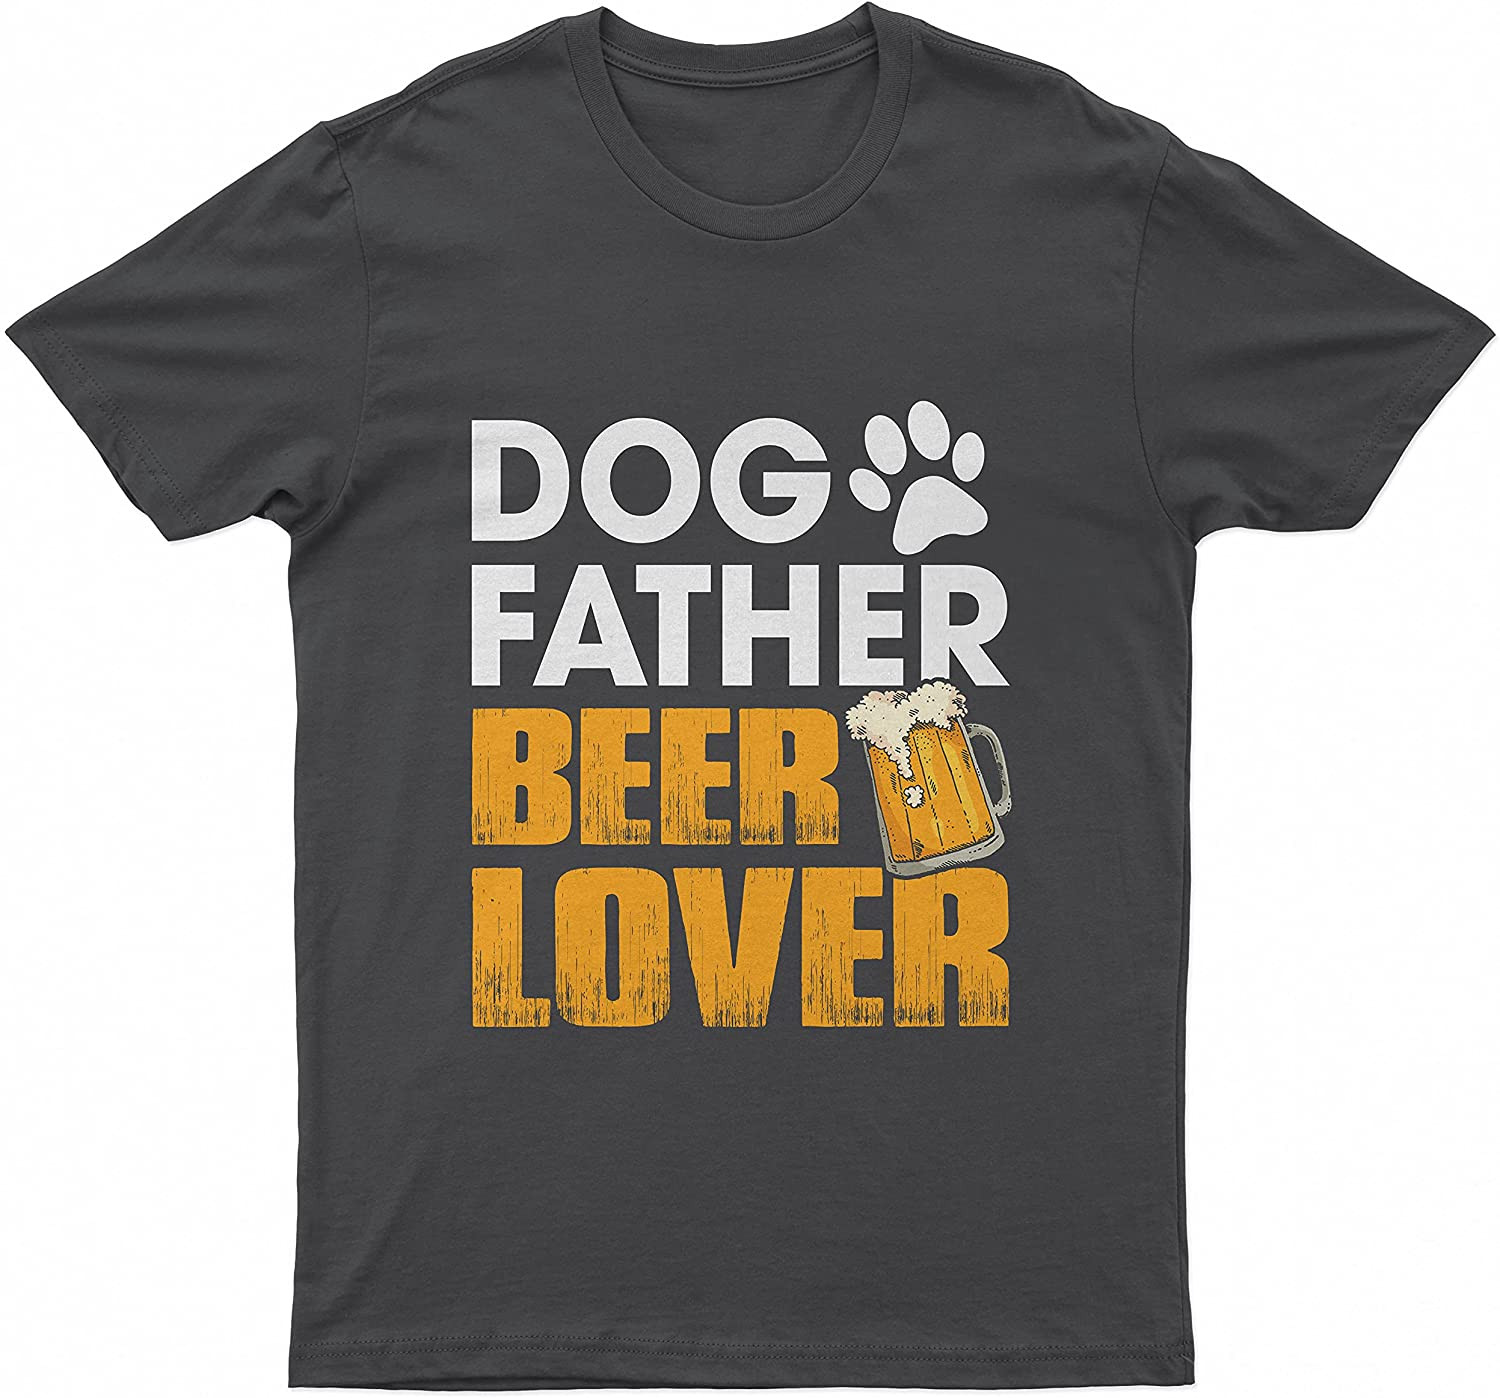 Lovely Dog Father Beer Lover Dog T-Shirt